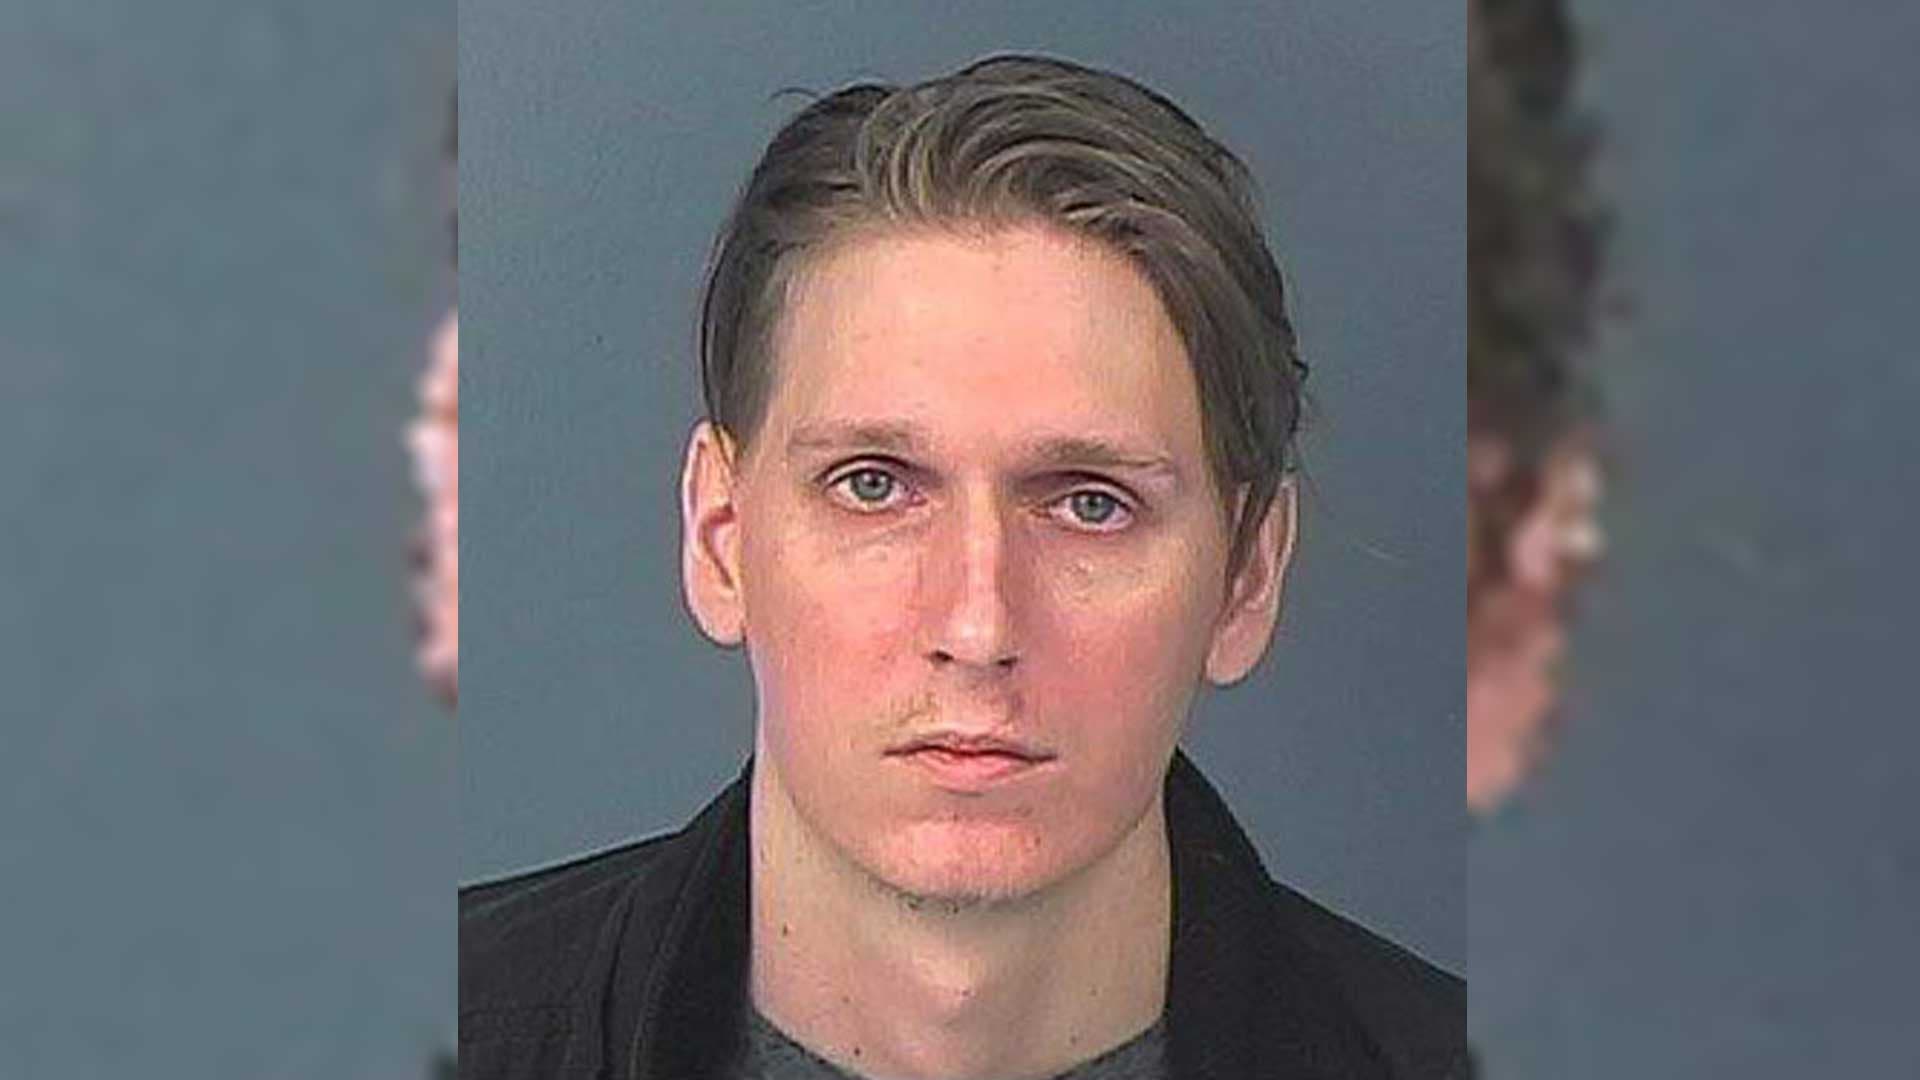 Florida Man Arrested for DUI After Confusing Bank with Taco Bell Drive-Thru